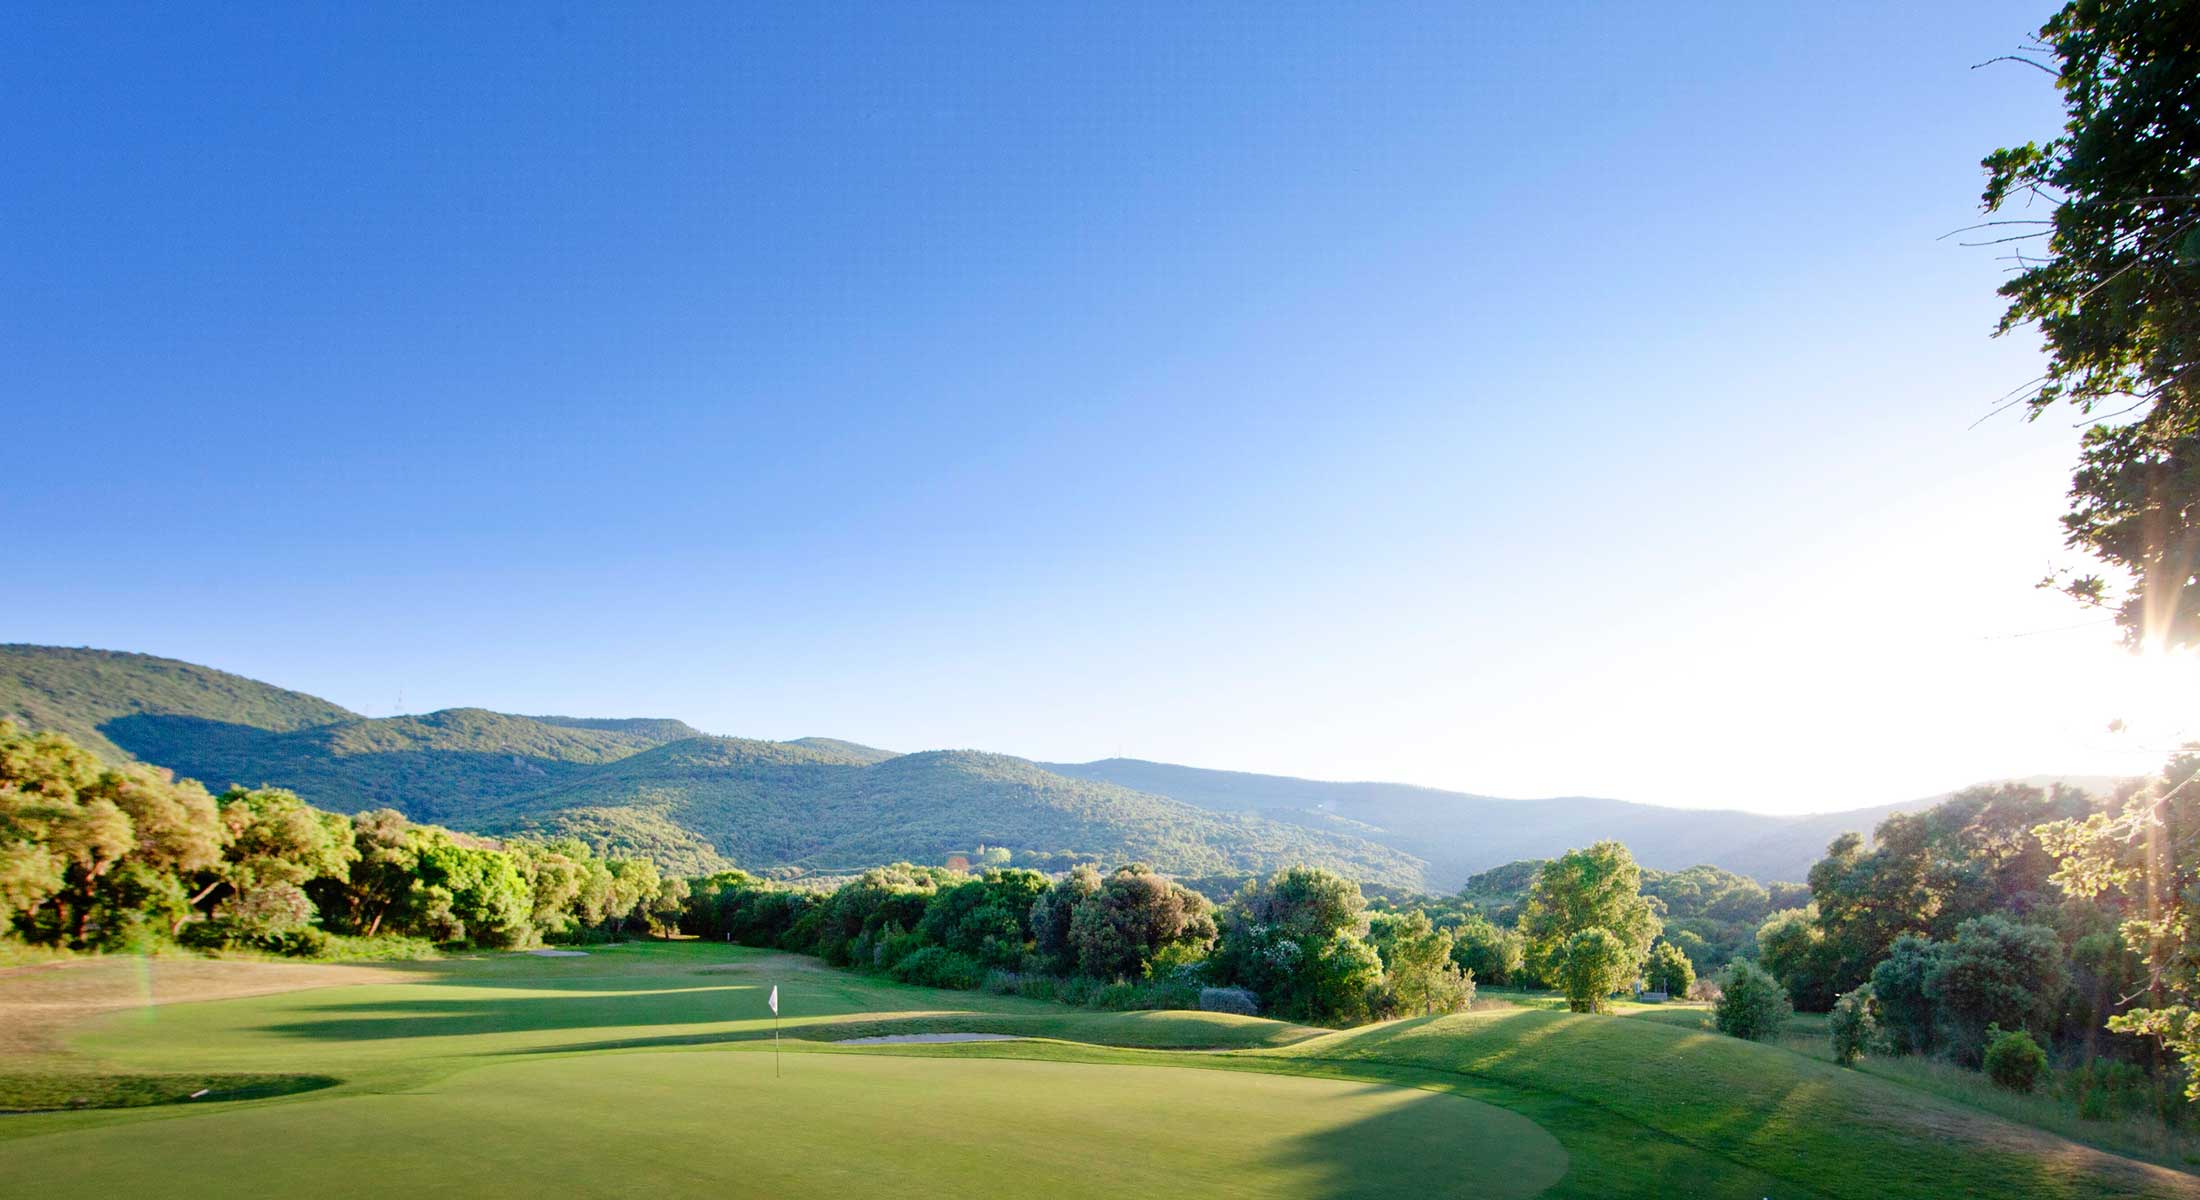 pga national italy golf course in tuscany